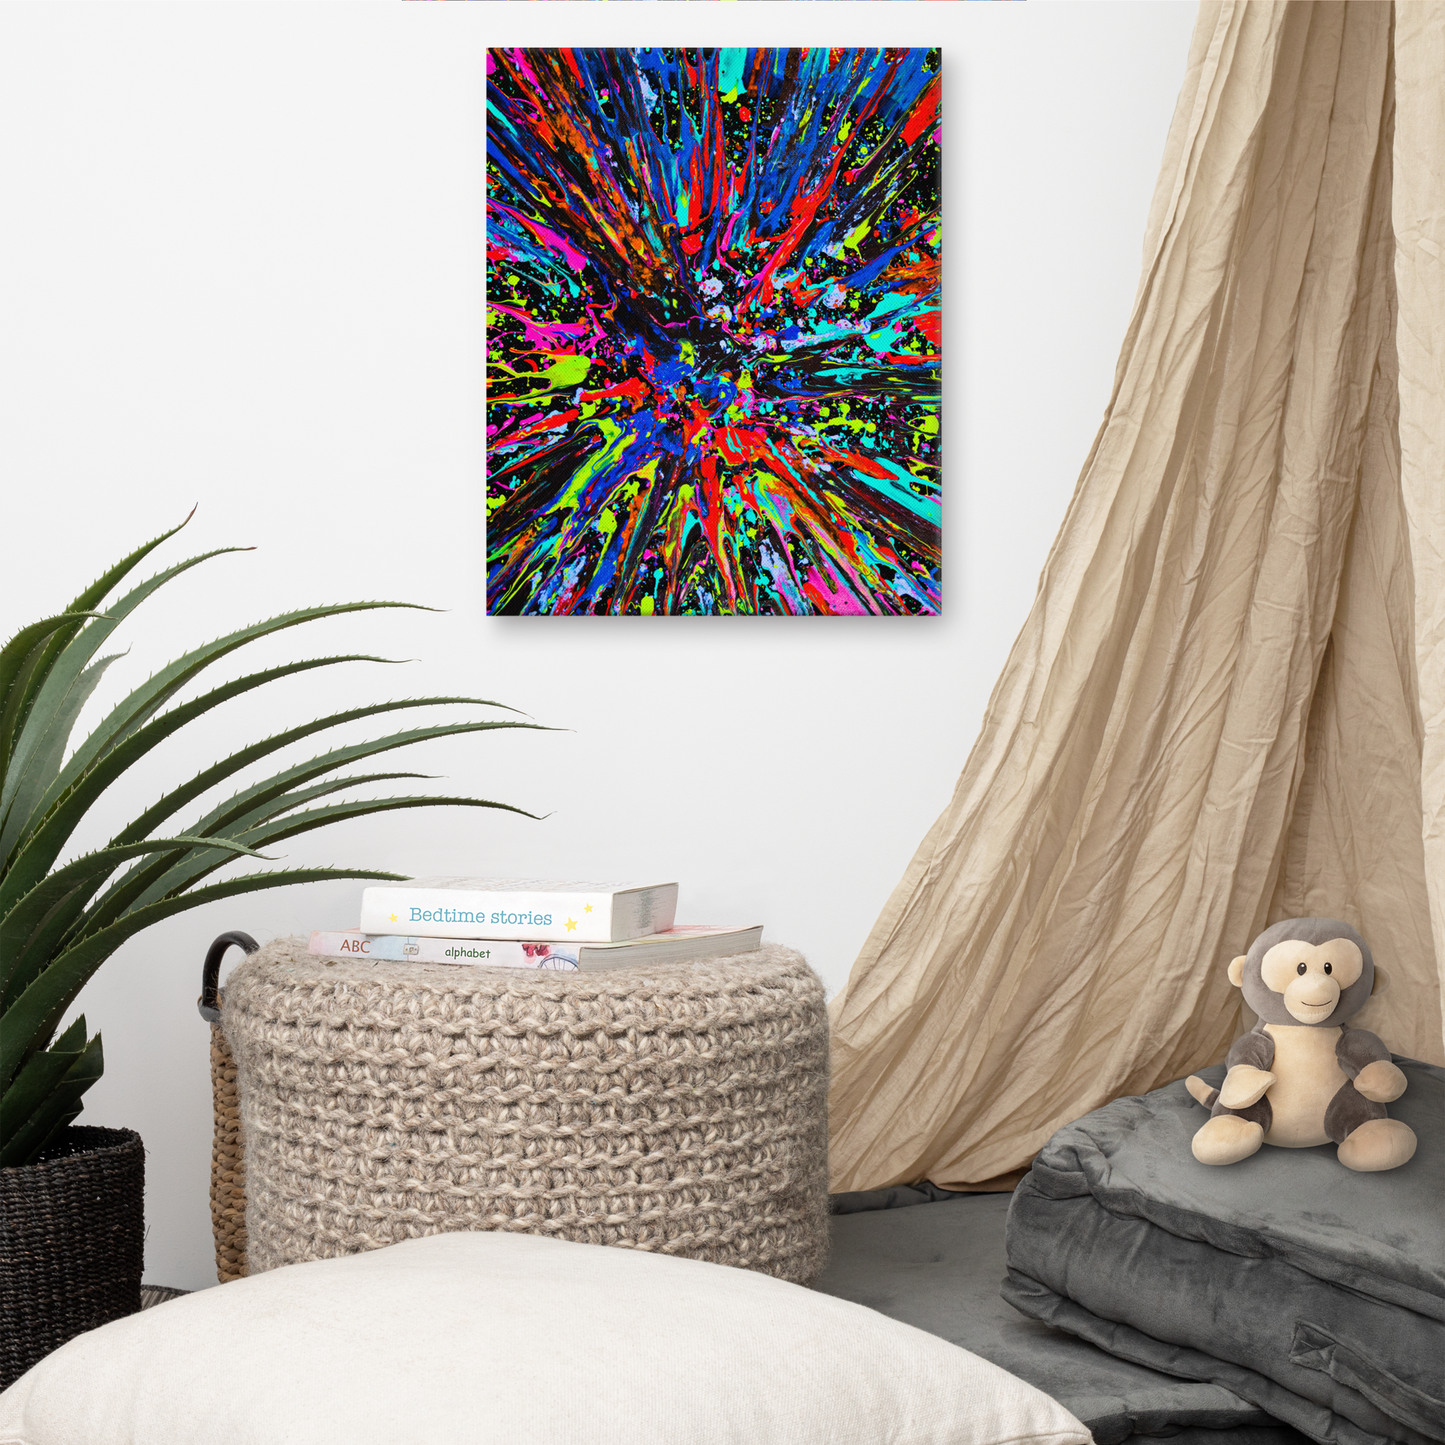 NightOwl Studio Abstract Wall Art, Splatter, Boho Living Room, Bedroom, Office, and Home Decor, Premium Canvas with Wooden Frame, Acrylic Painting Reproduction, 16” x 20”